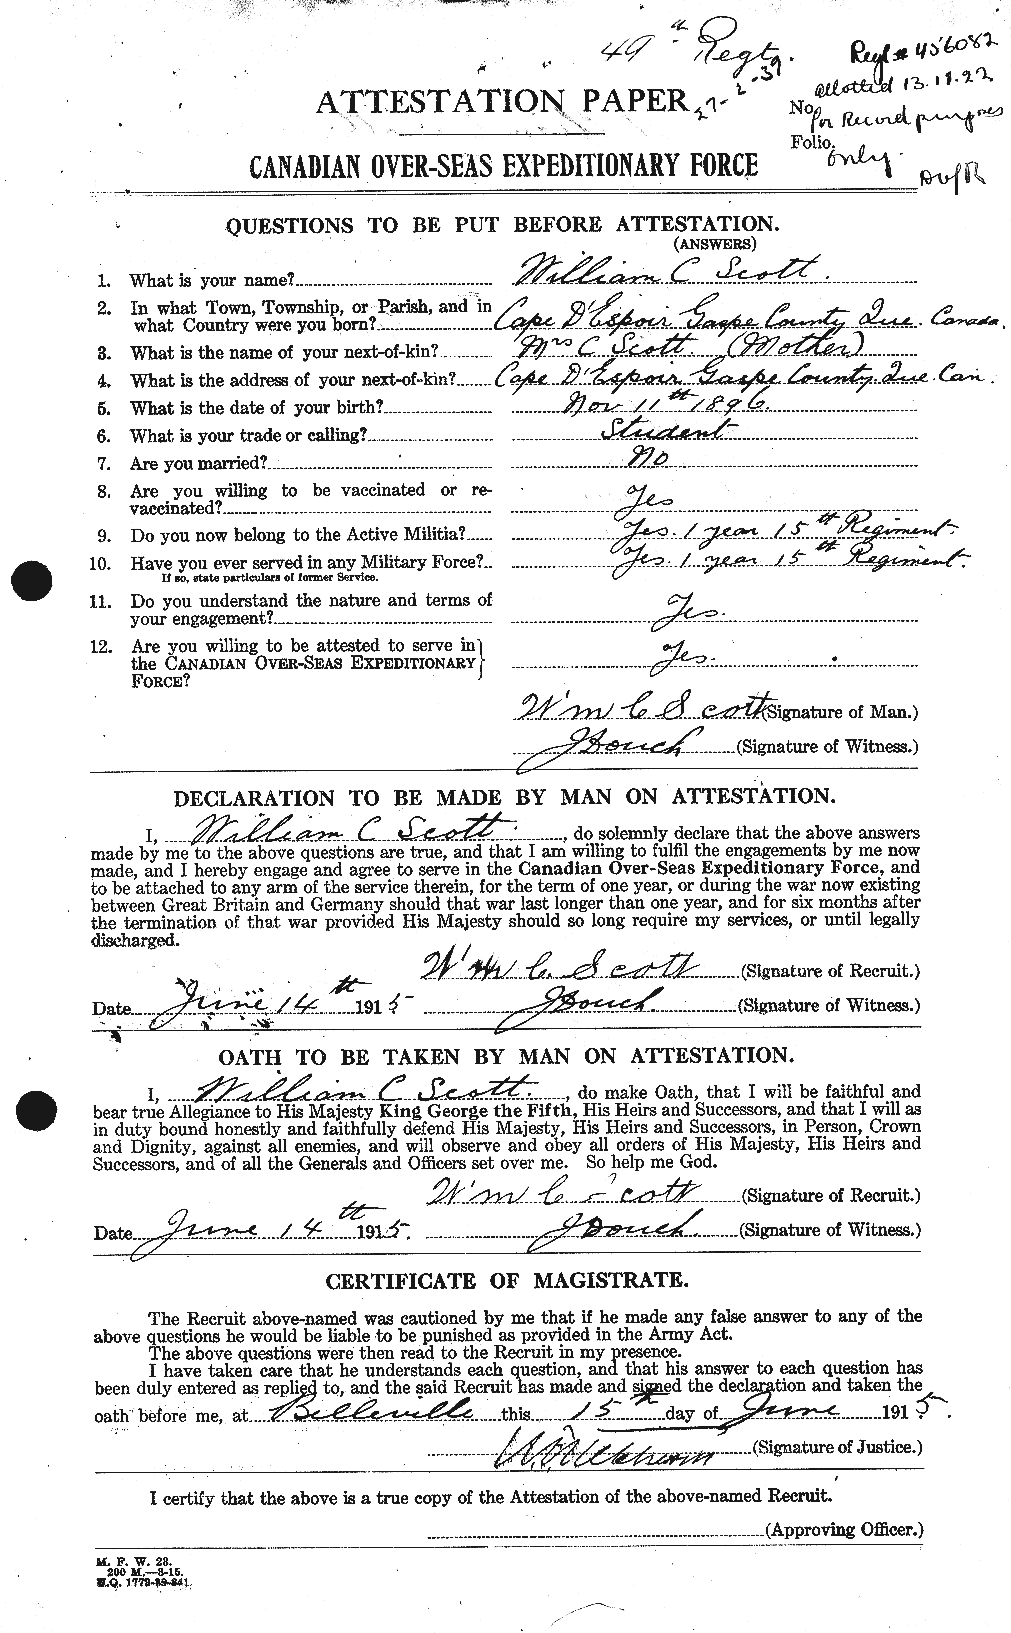 Personnel Records of the First World War - CEF 087041a